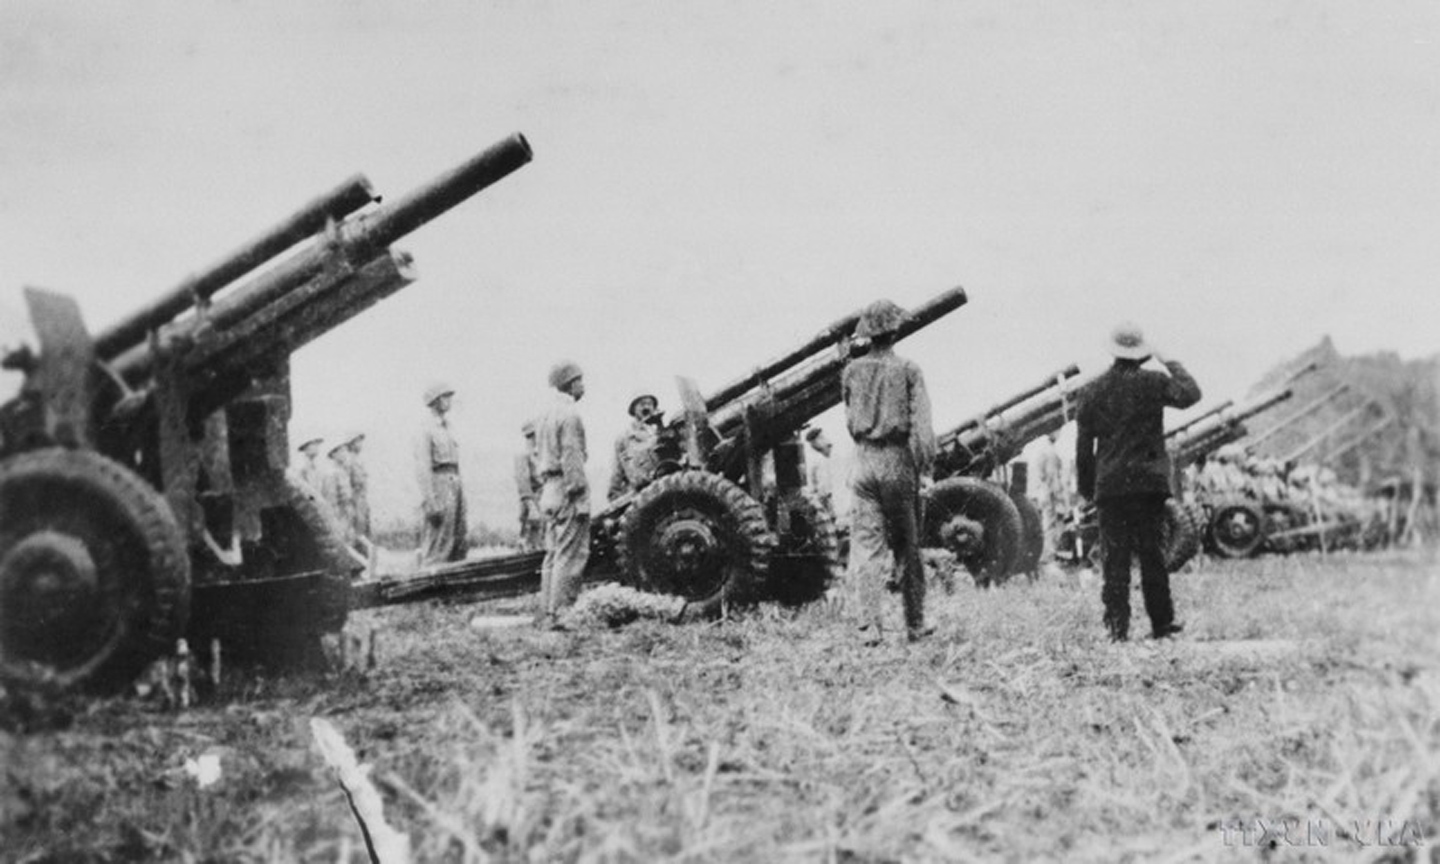 April 29, 1954: Vietnamese troops were ready for the third attack